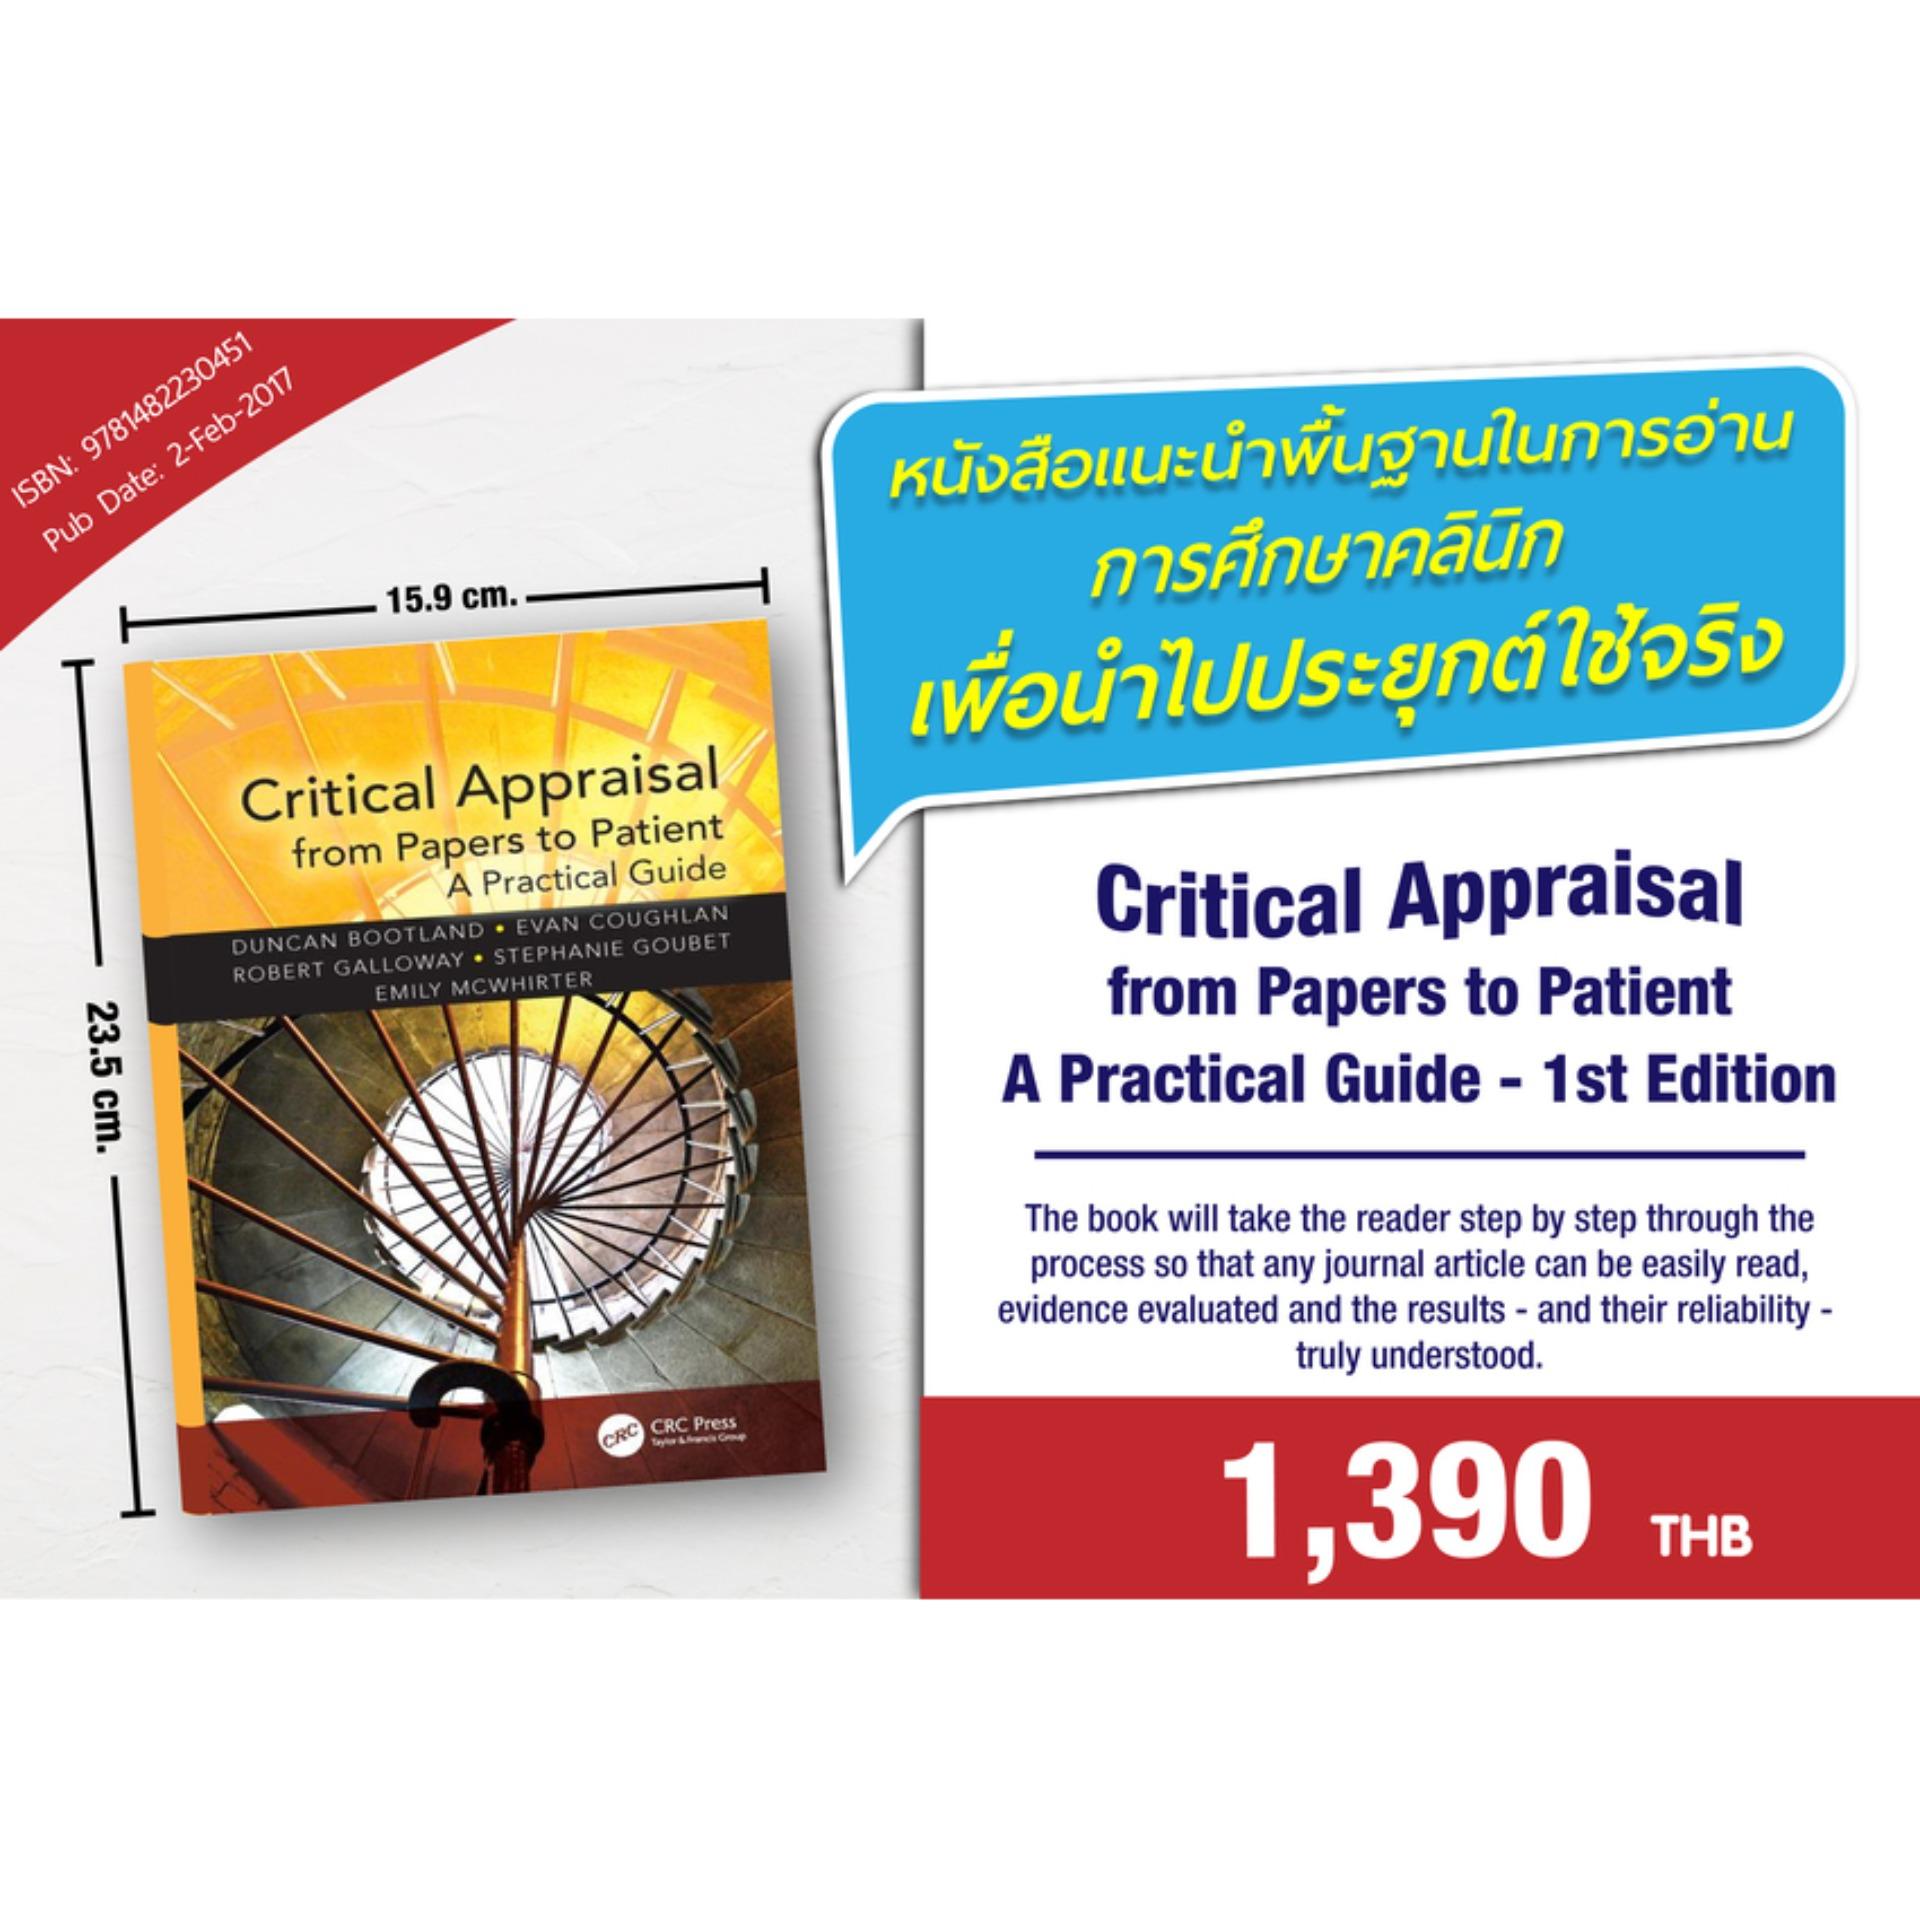 Critical Appraisal from Papers to Patient: A Practical Guide, 1 ed.